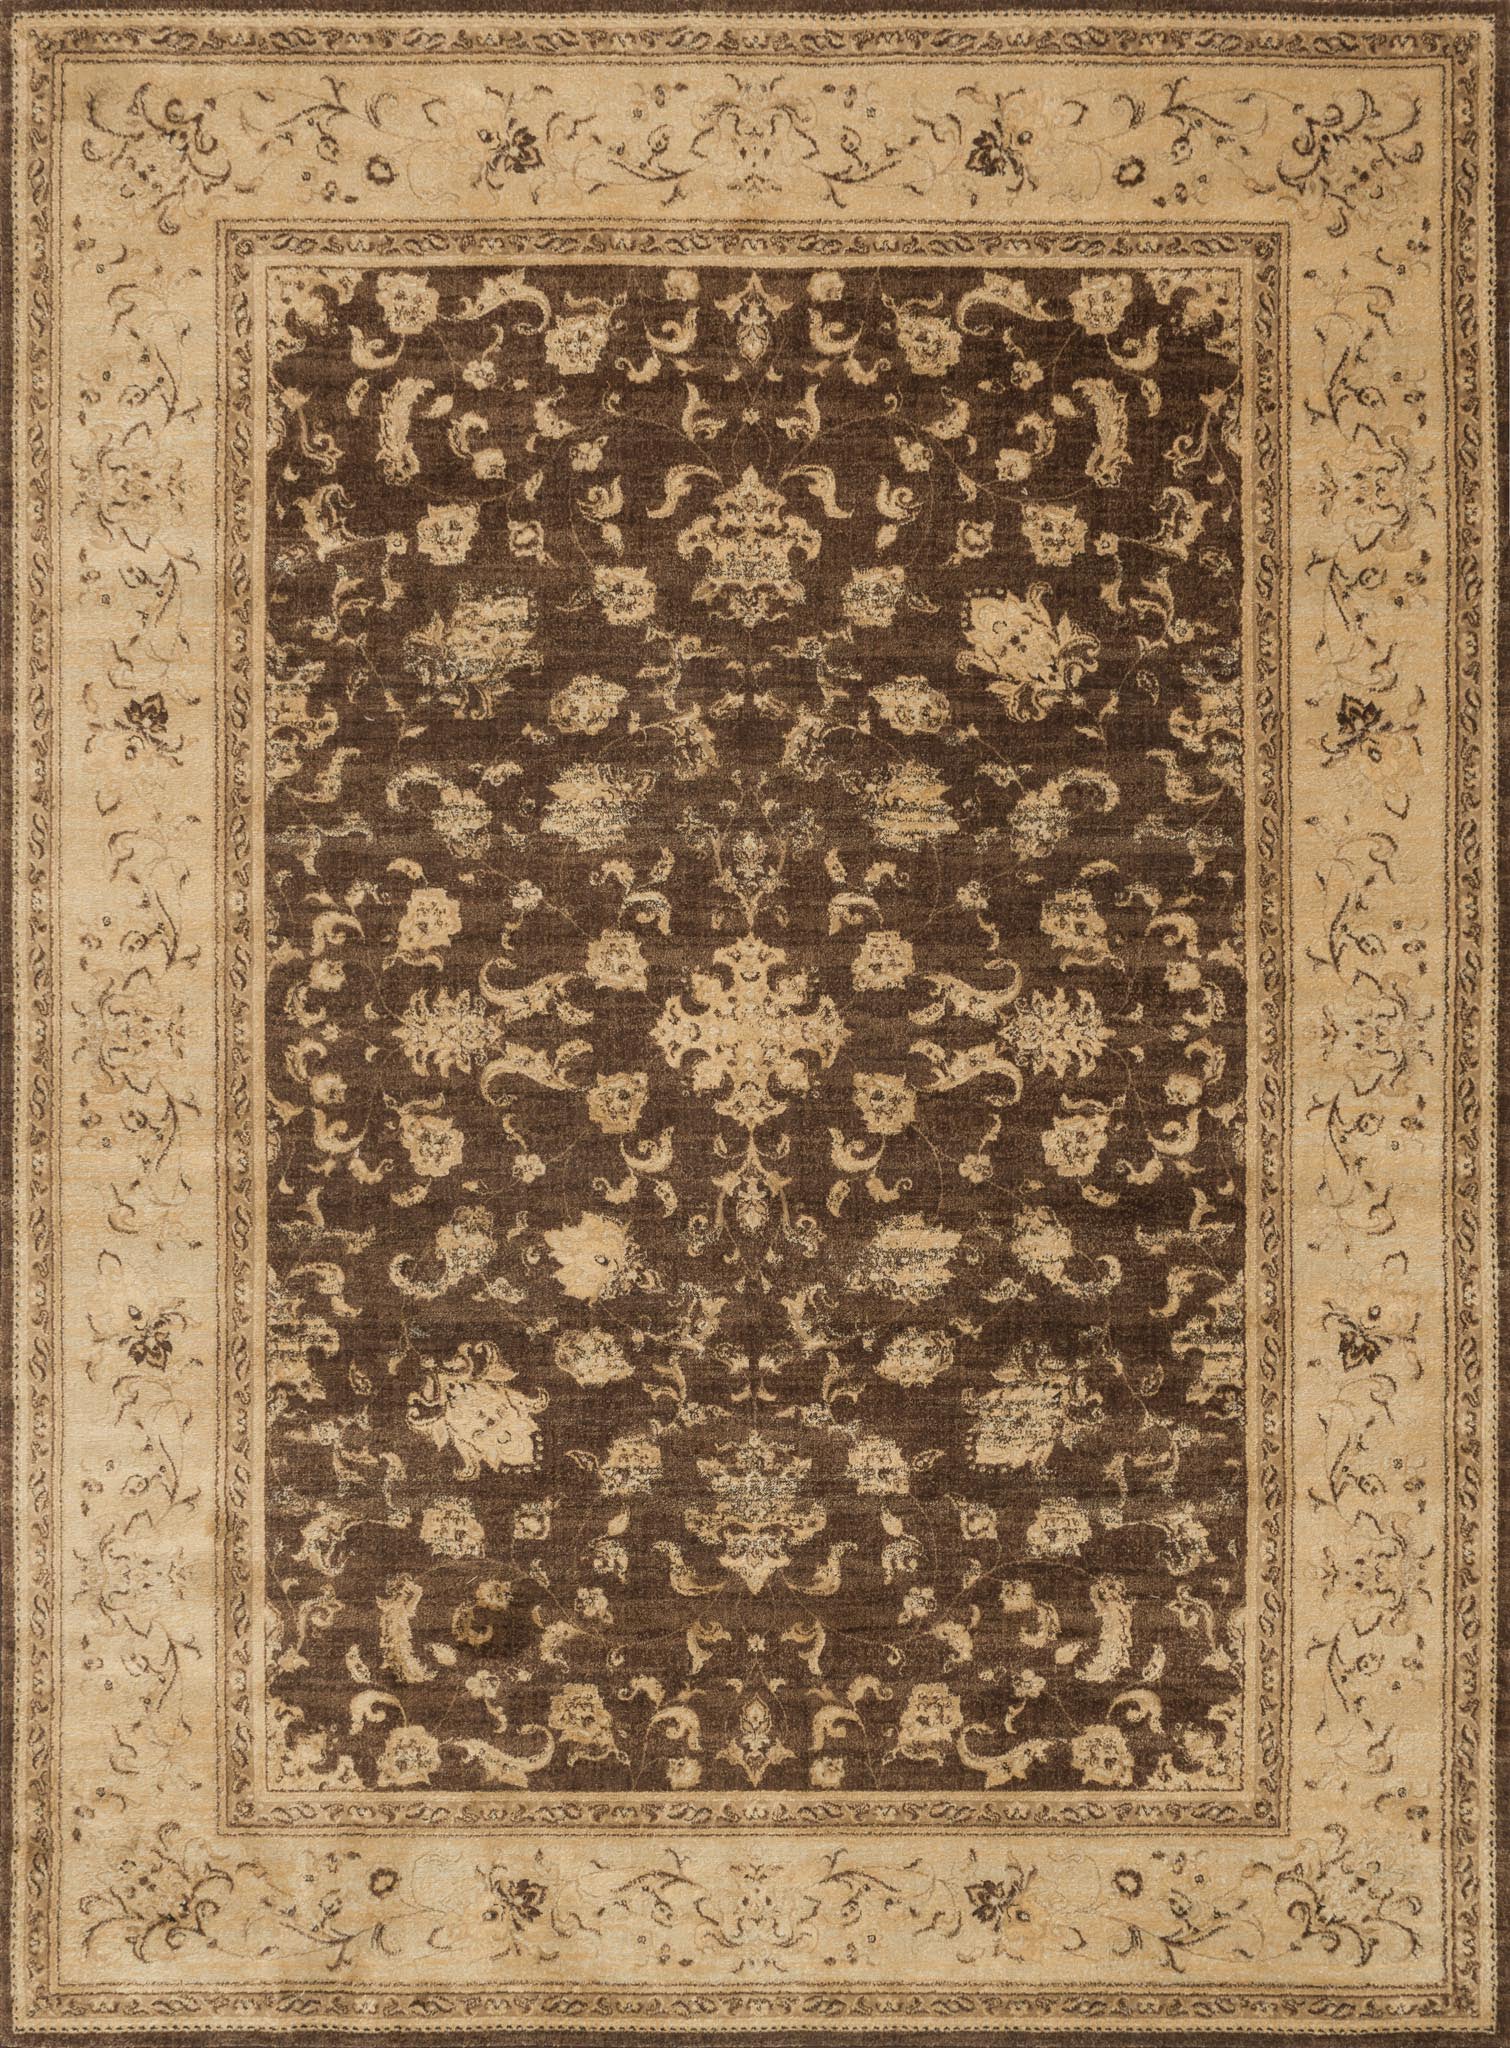 Mystique Rug - The Rug Collection